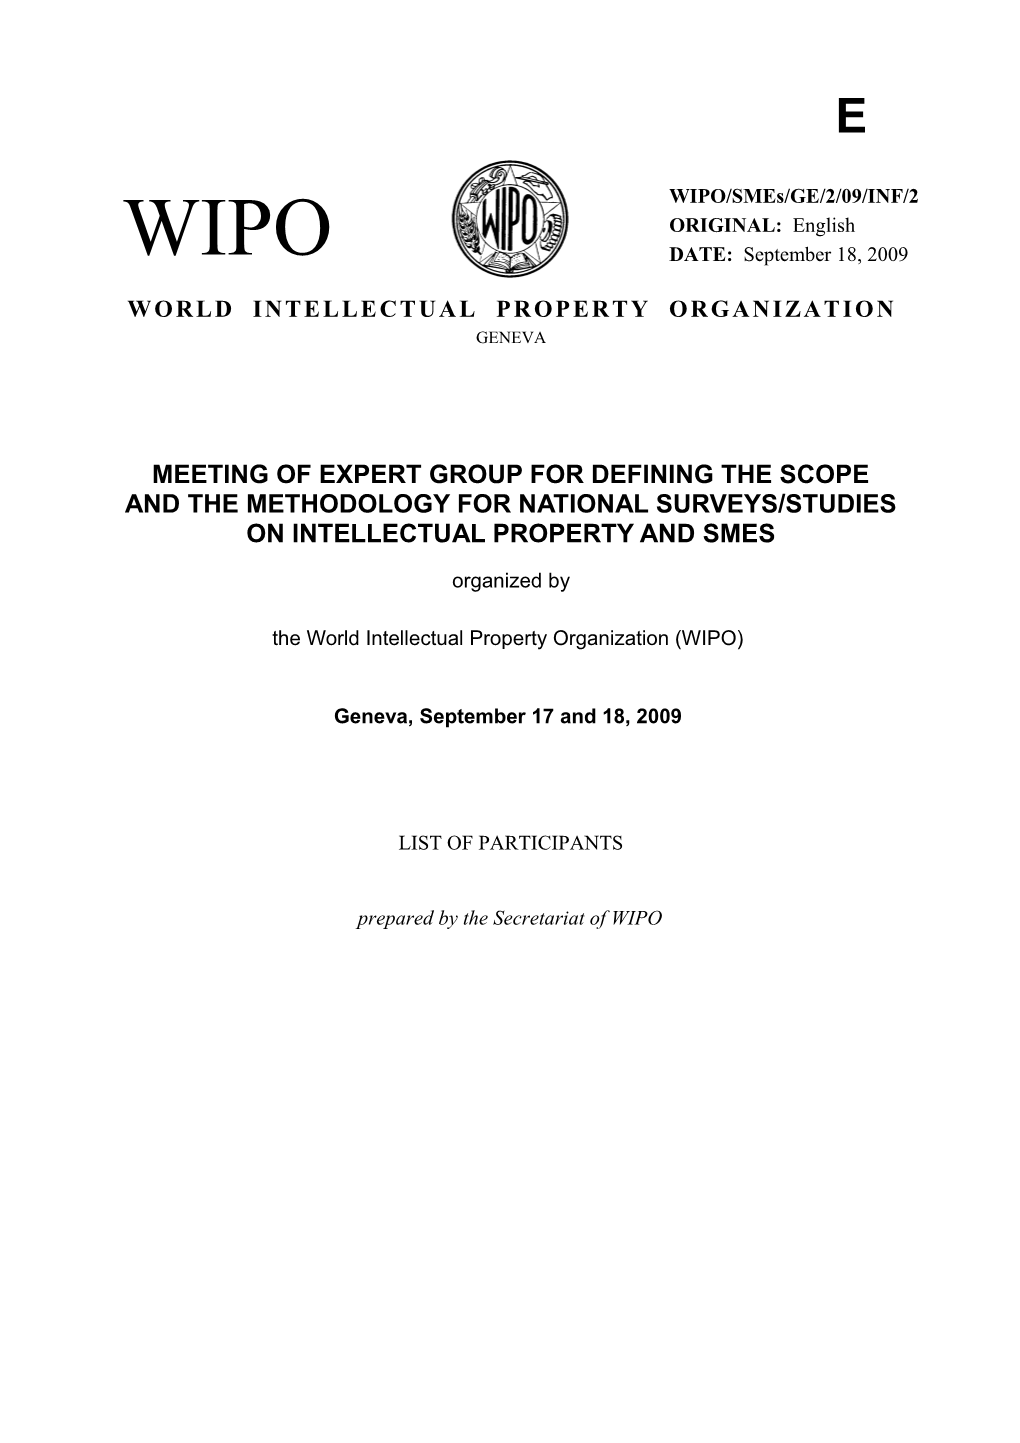 WIPO/Smes/GE/2/09/INF/2